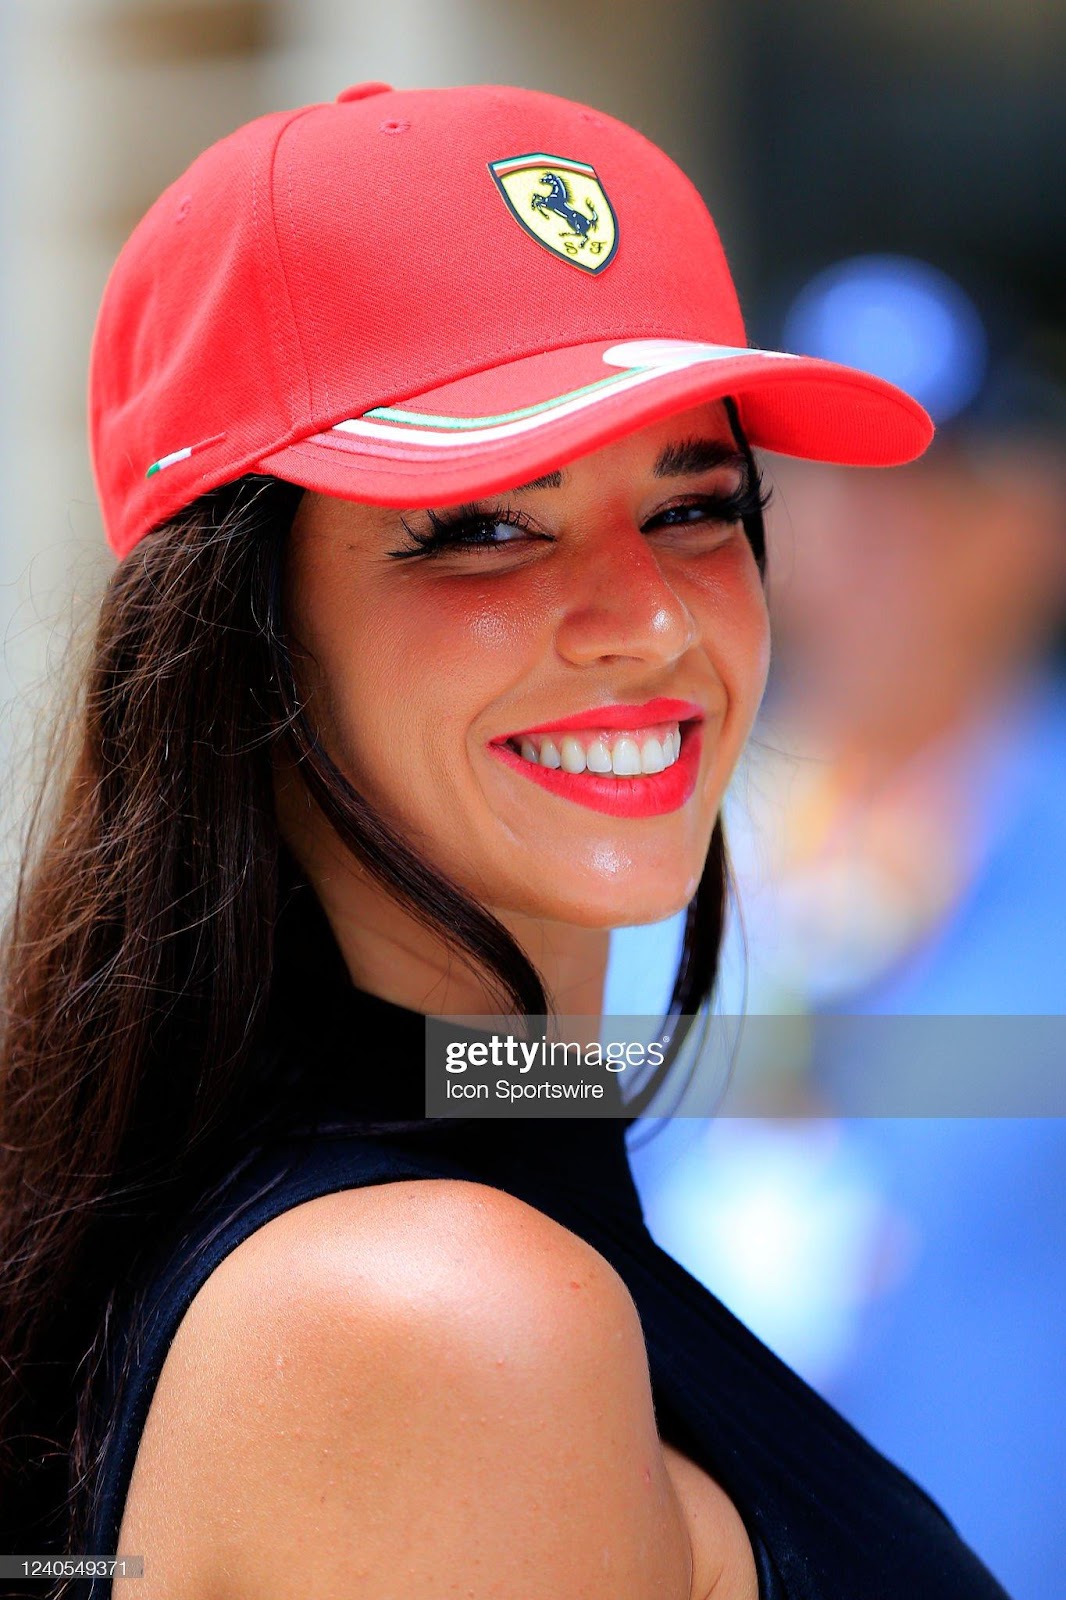 D:\Documenti\posts\posts\Miami\New folder\donne\ferrari-fan-smiles-for-the-camera-prior-to-the-first-running-of-the-picture-id1240549371.jpg